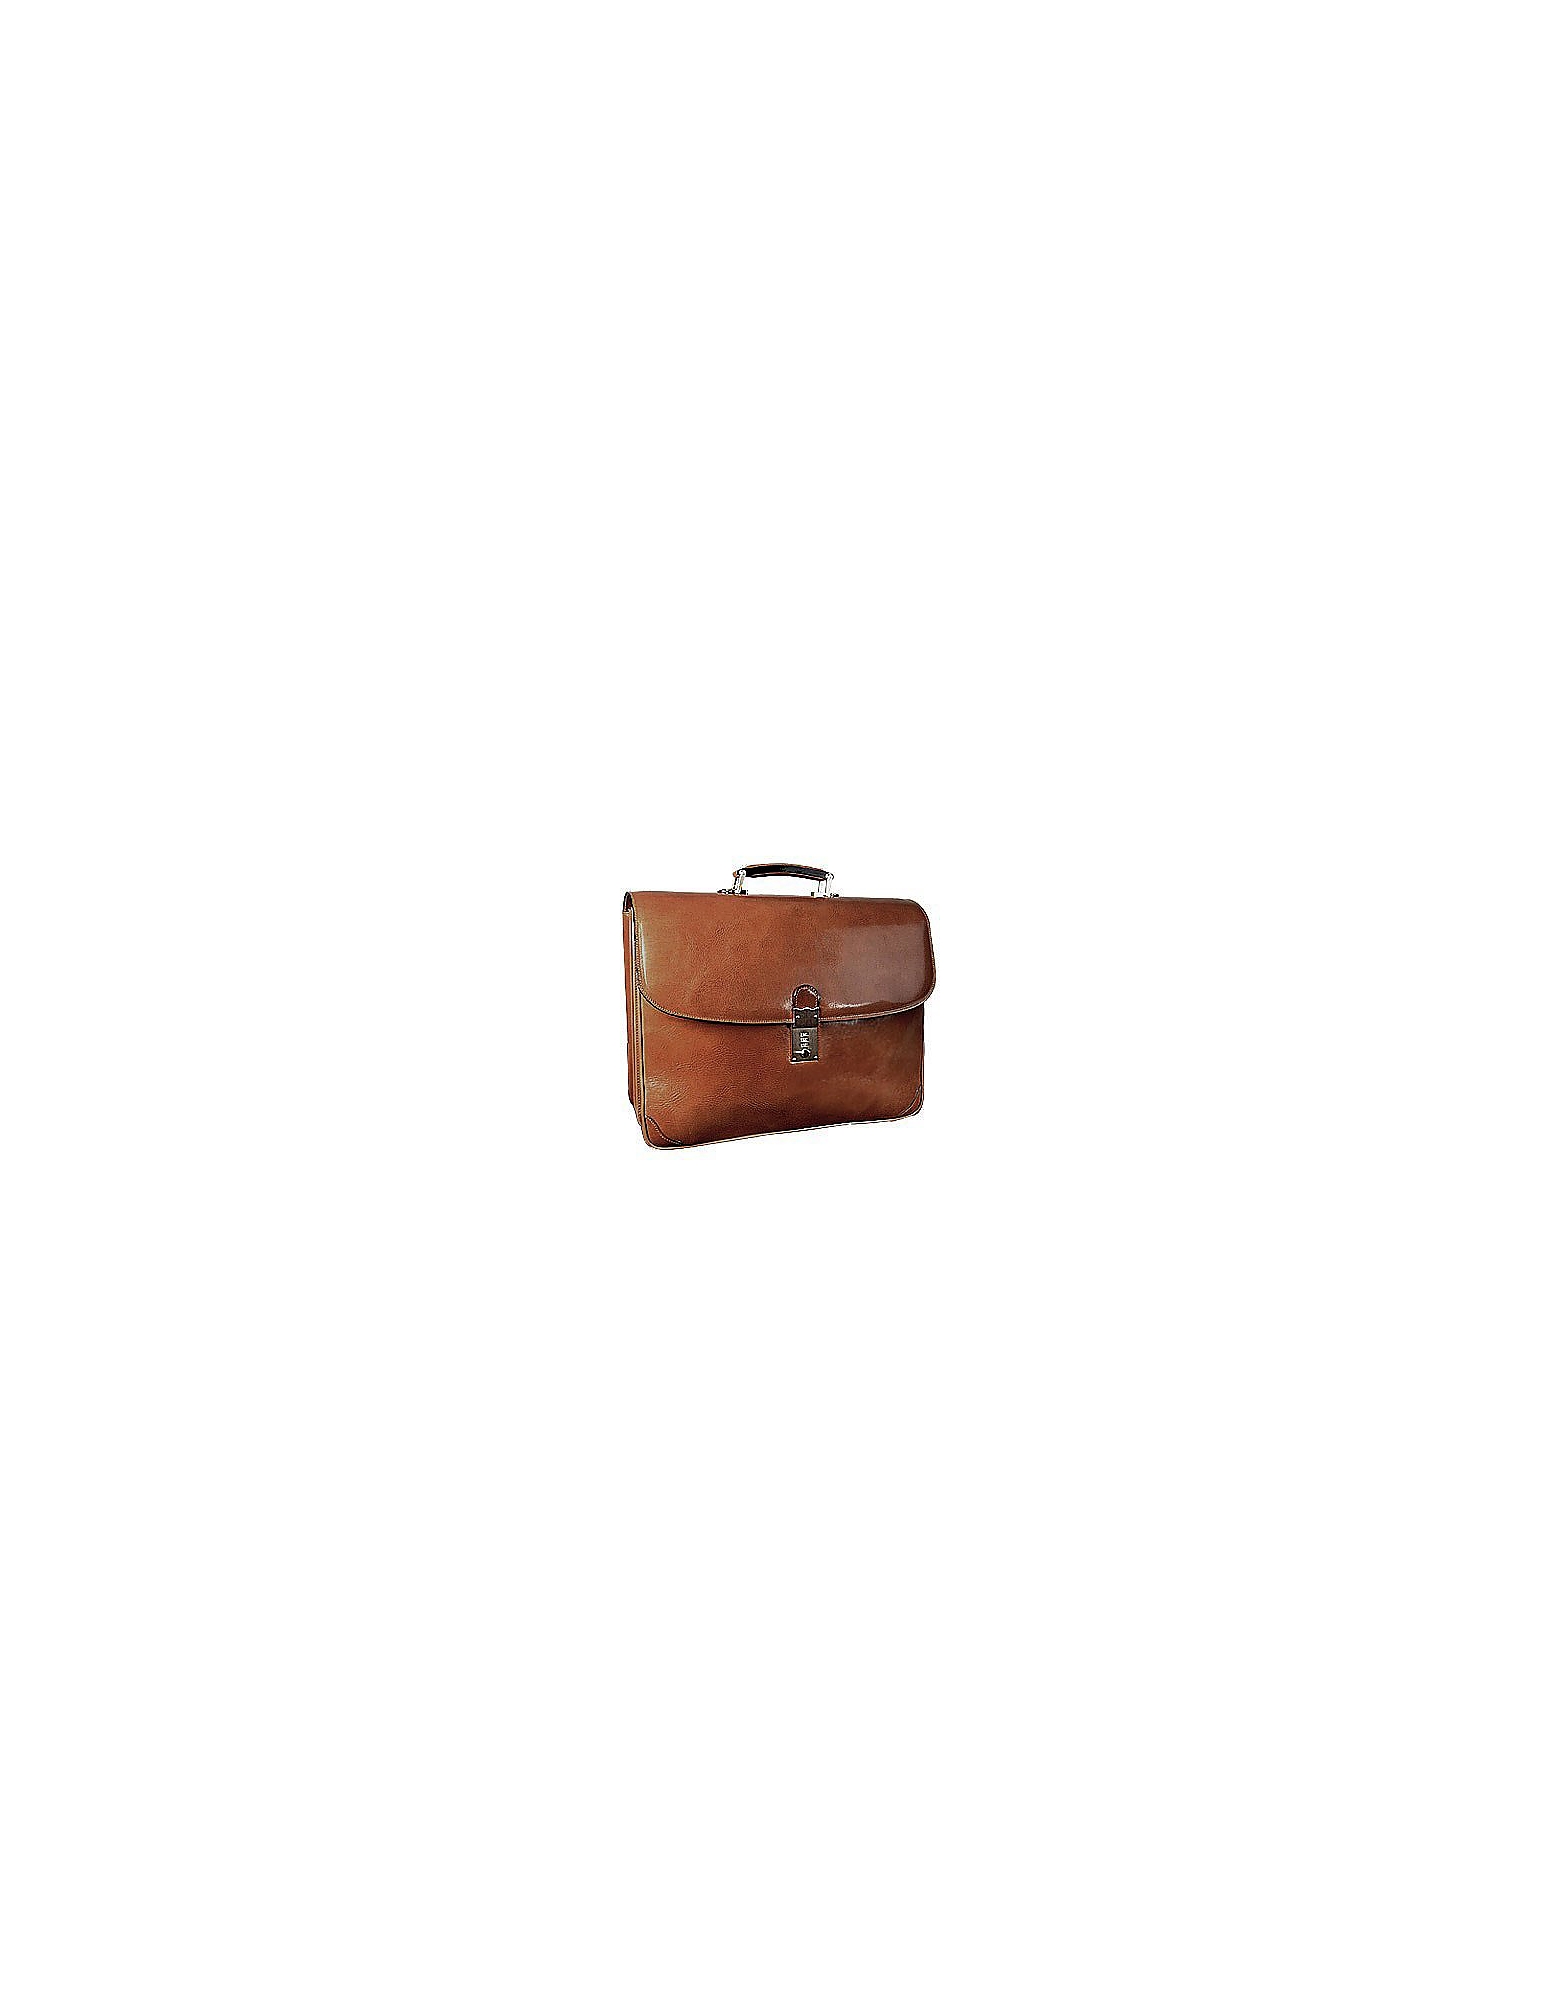 L.A.P.A. Designer Travel Bags, Classic Sand Leather Briefcase